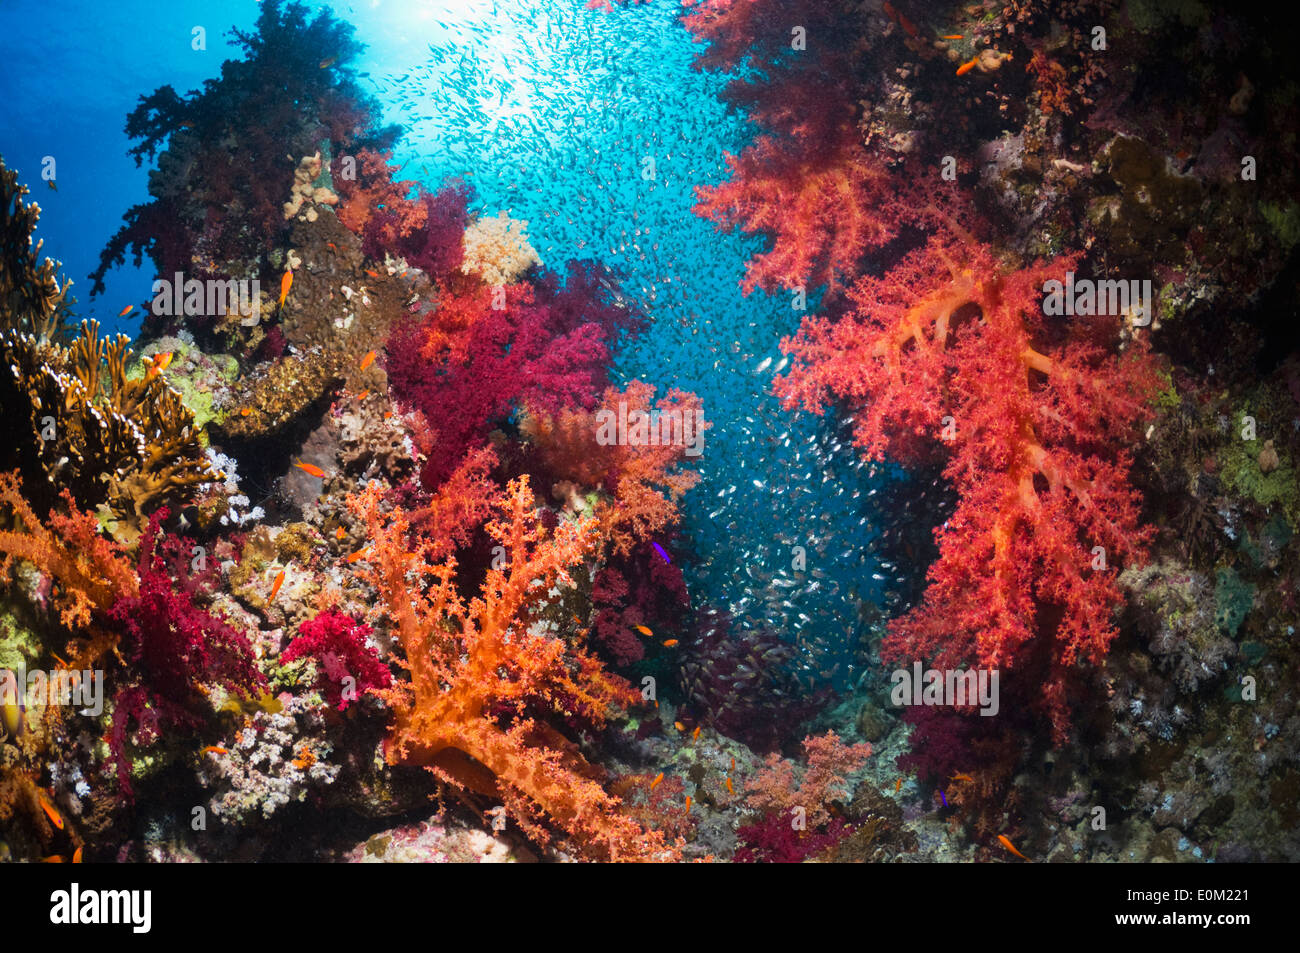 Coral reef scenery with soft corals and Pygmy sweepers. Egypt, Red Sea. (Dendronnephthya sp), ( Parapriacanthus guentheri) Stock Photo